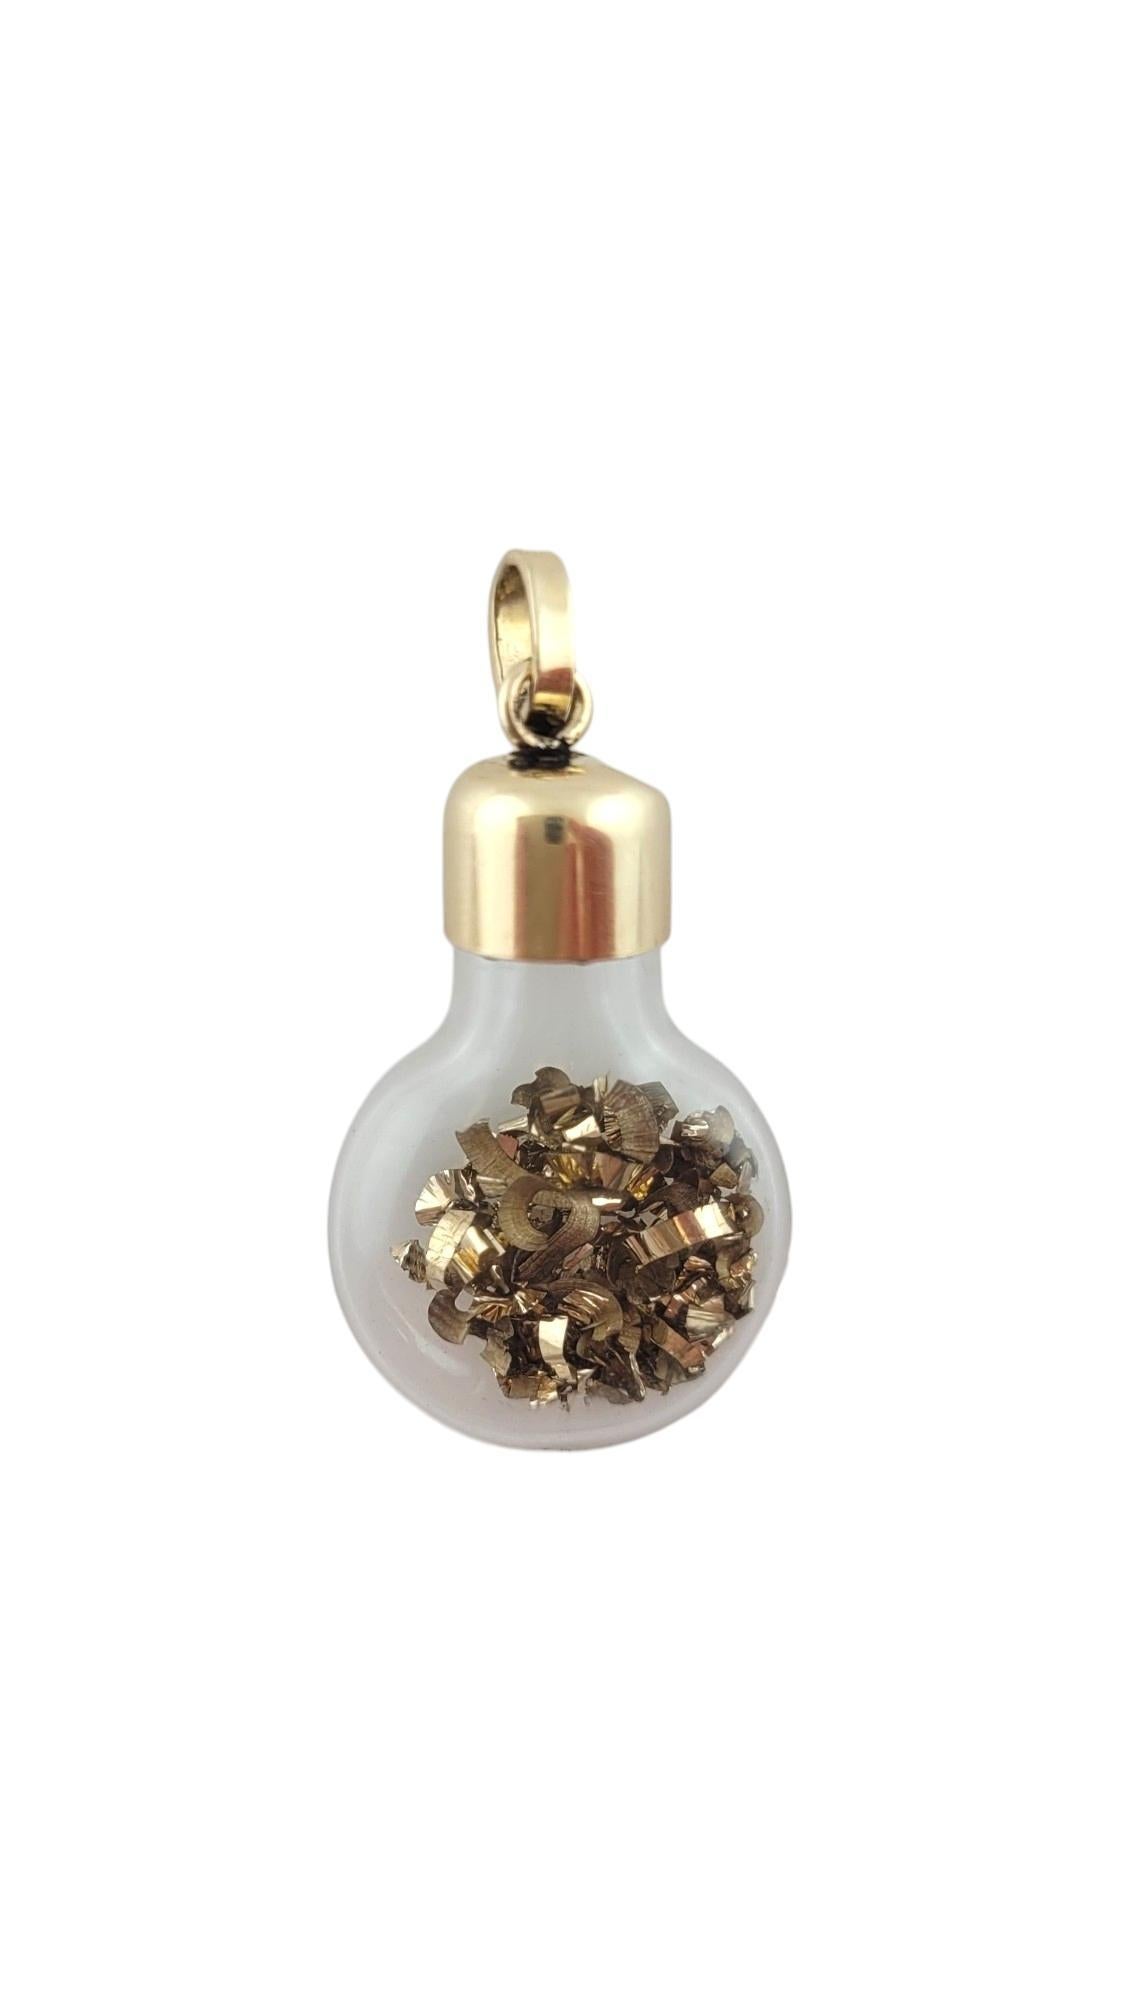 Vintage 14K Yellow Gold Lightbulb Charm -

Brighten your style with this lightbulb charm. 

Size: 25.5mm X 16.6mm 

Weight: 2.2 g/ 1.4dwt

Hallmark: r 14

*Chain not included*

Very good condition, professionally polished.

Will come packaged in a